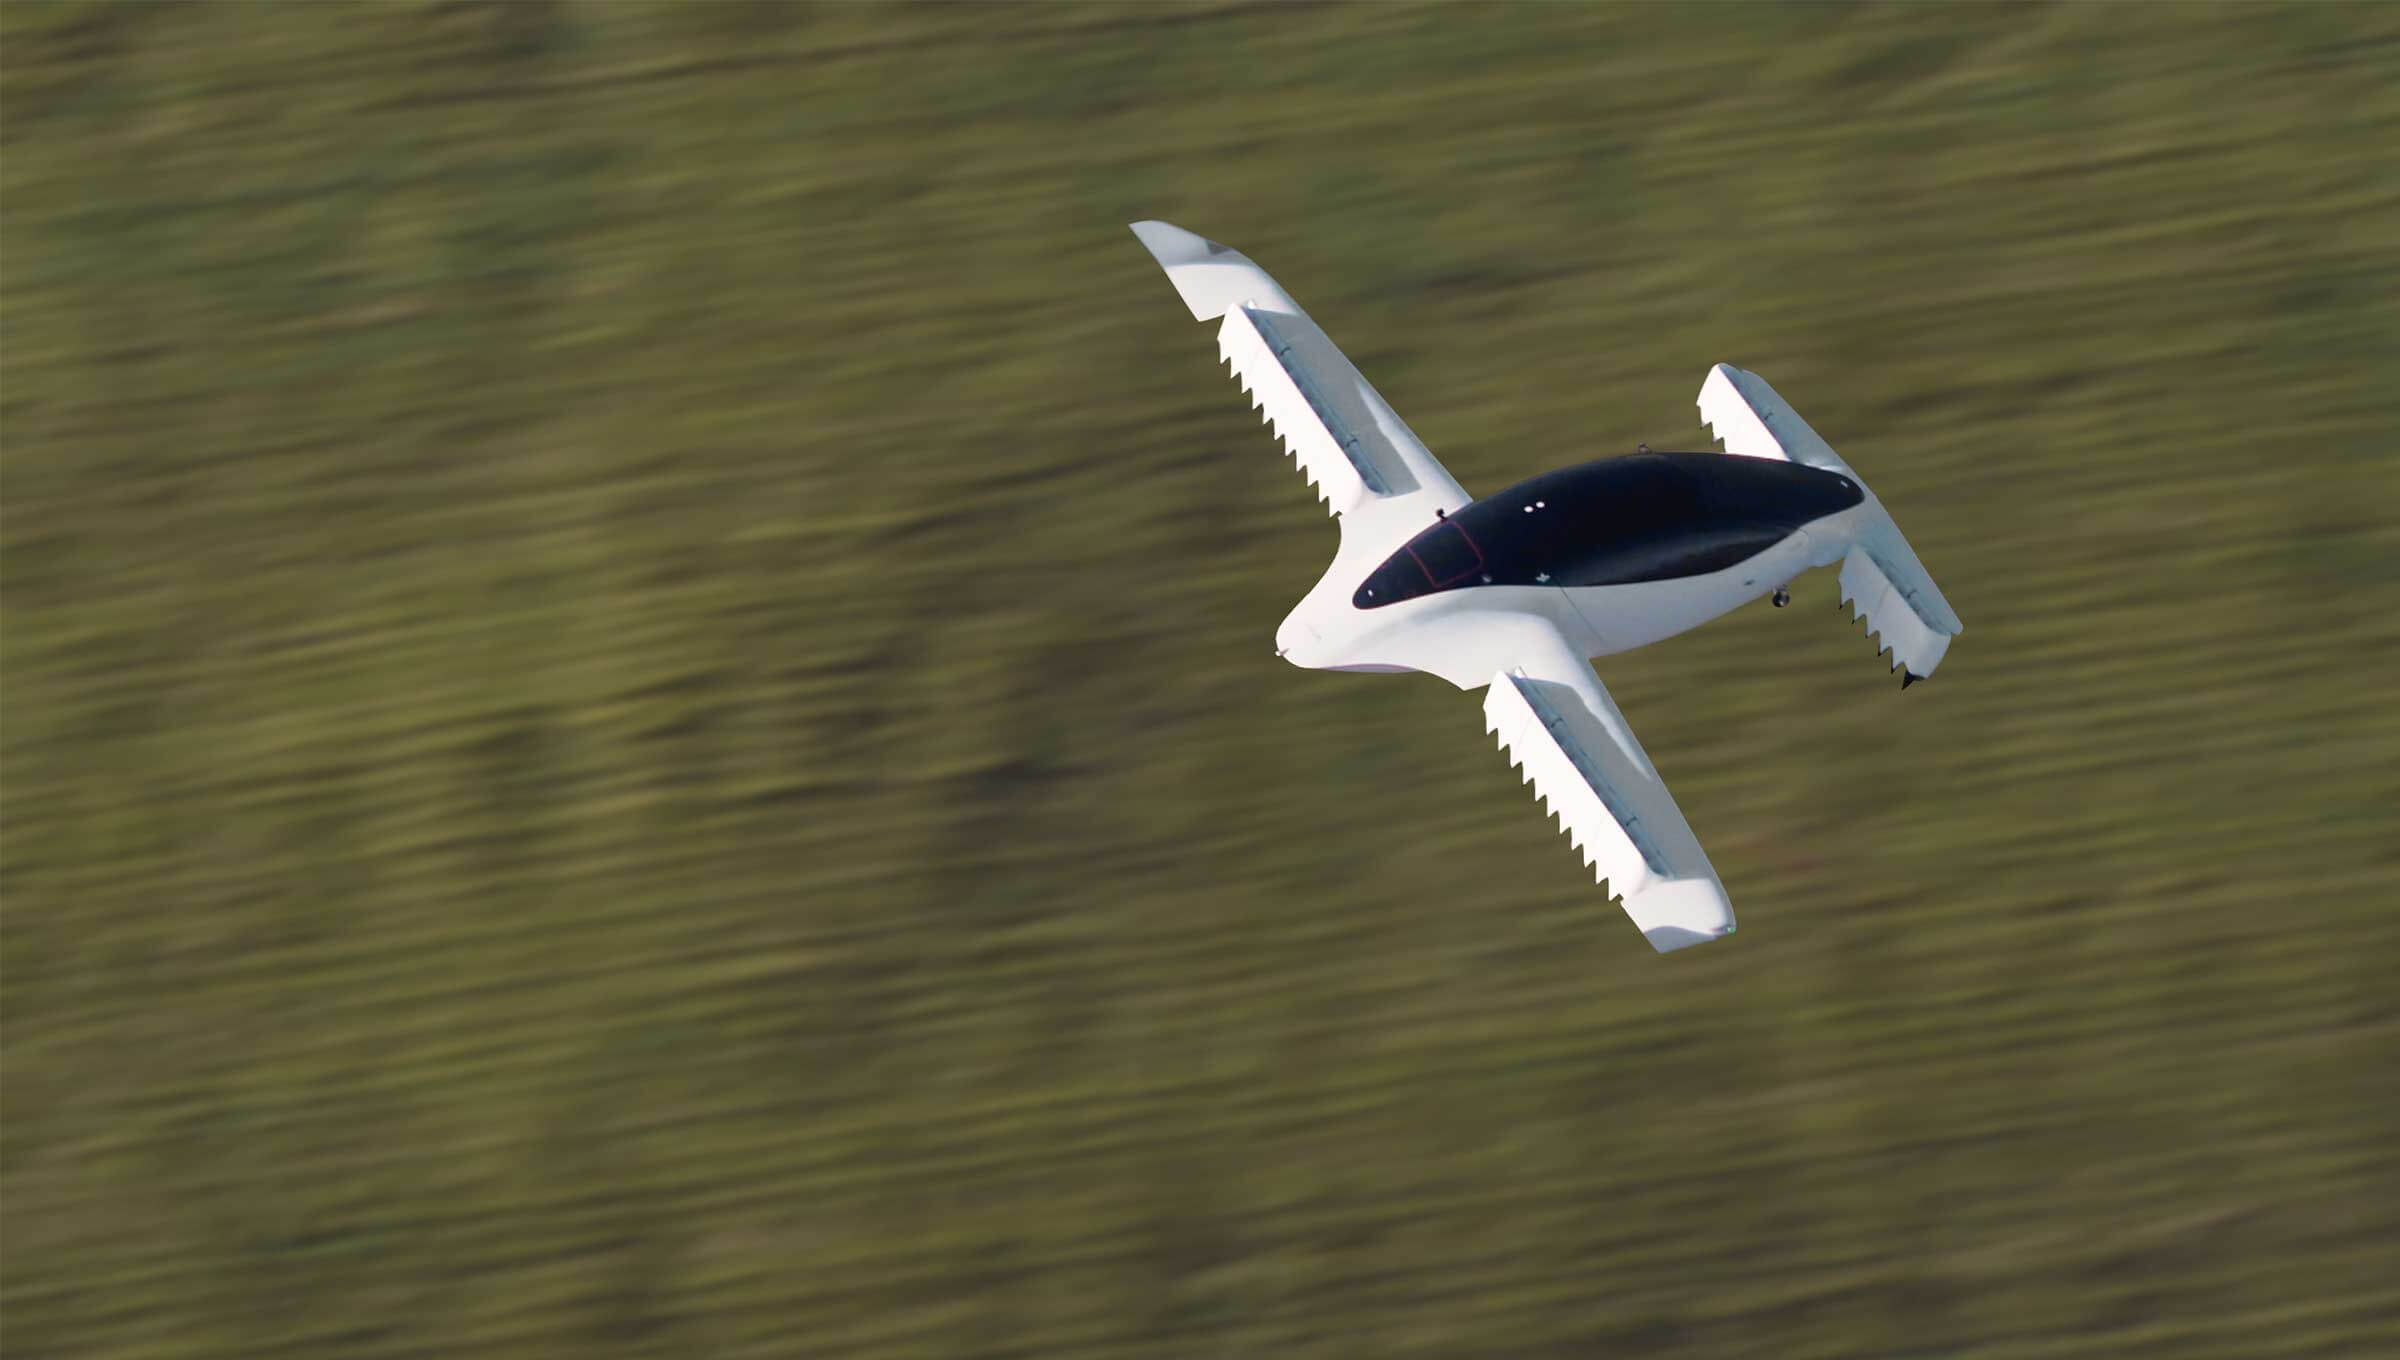 Lilium's all-electric VTOL taxi achieves forward flight for the first time